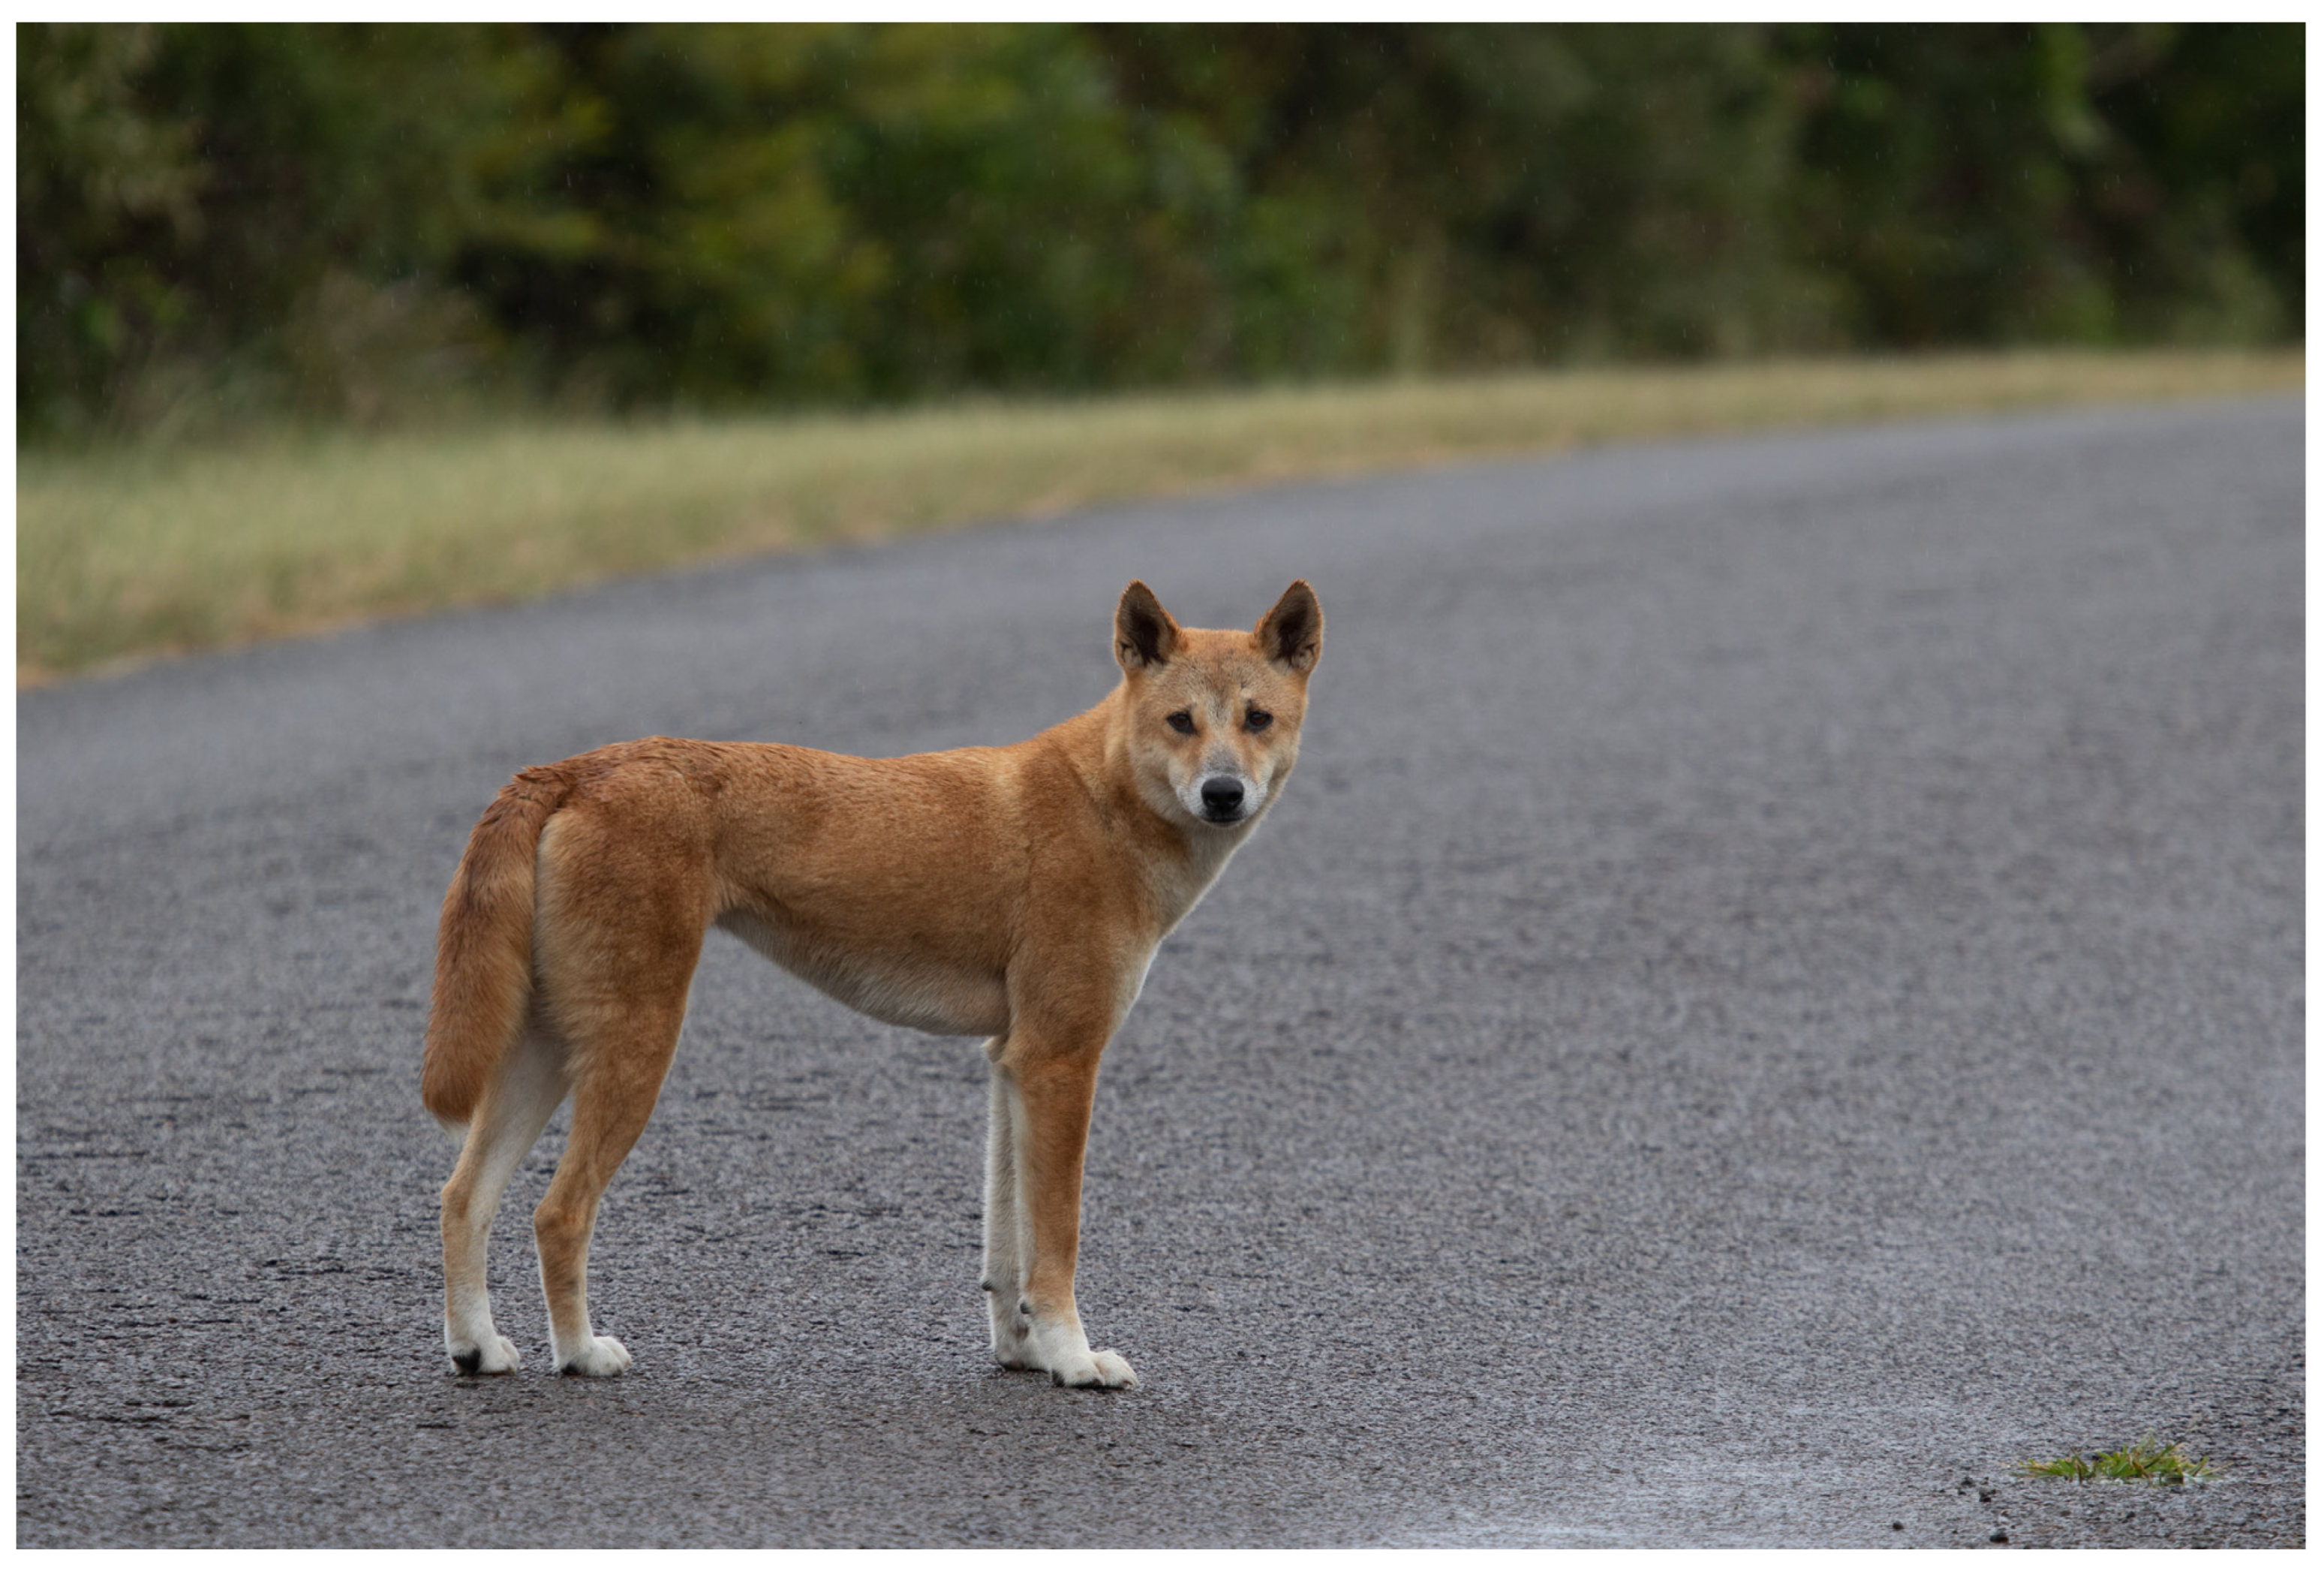 Animals | Free Full-Text | The Role of Socialisation in the Taming and  Management of Wild Dingoes by Australian Aboriginal People